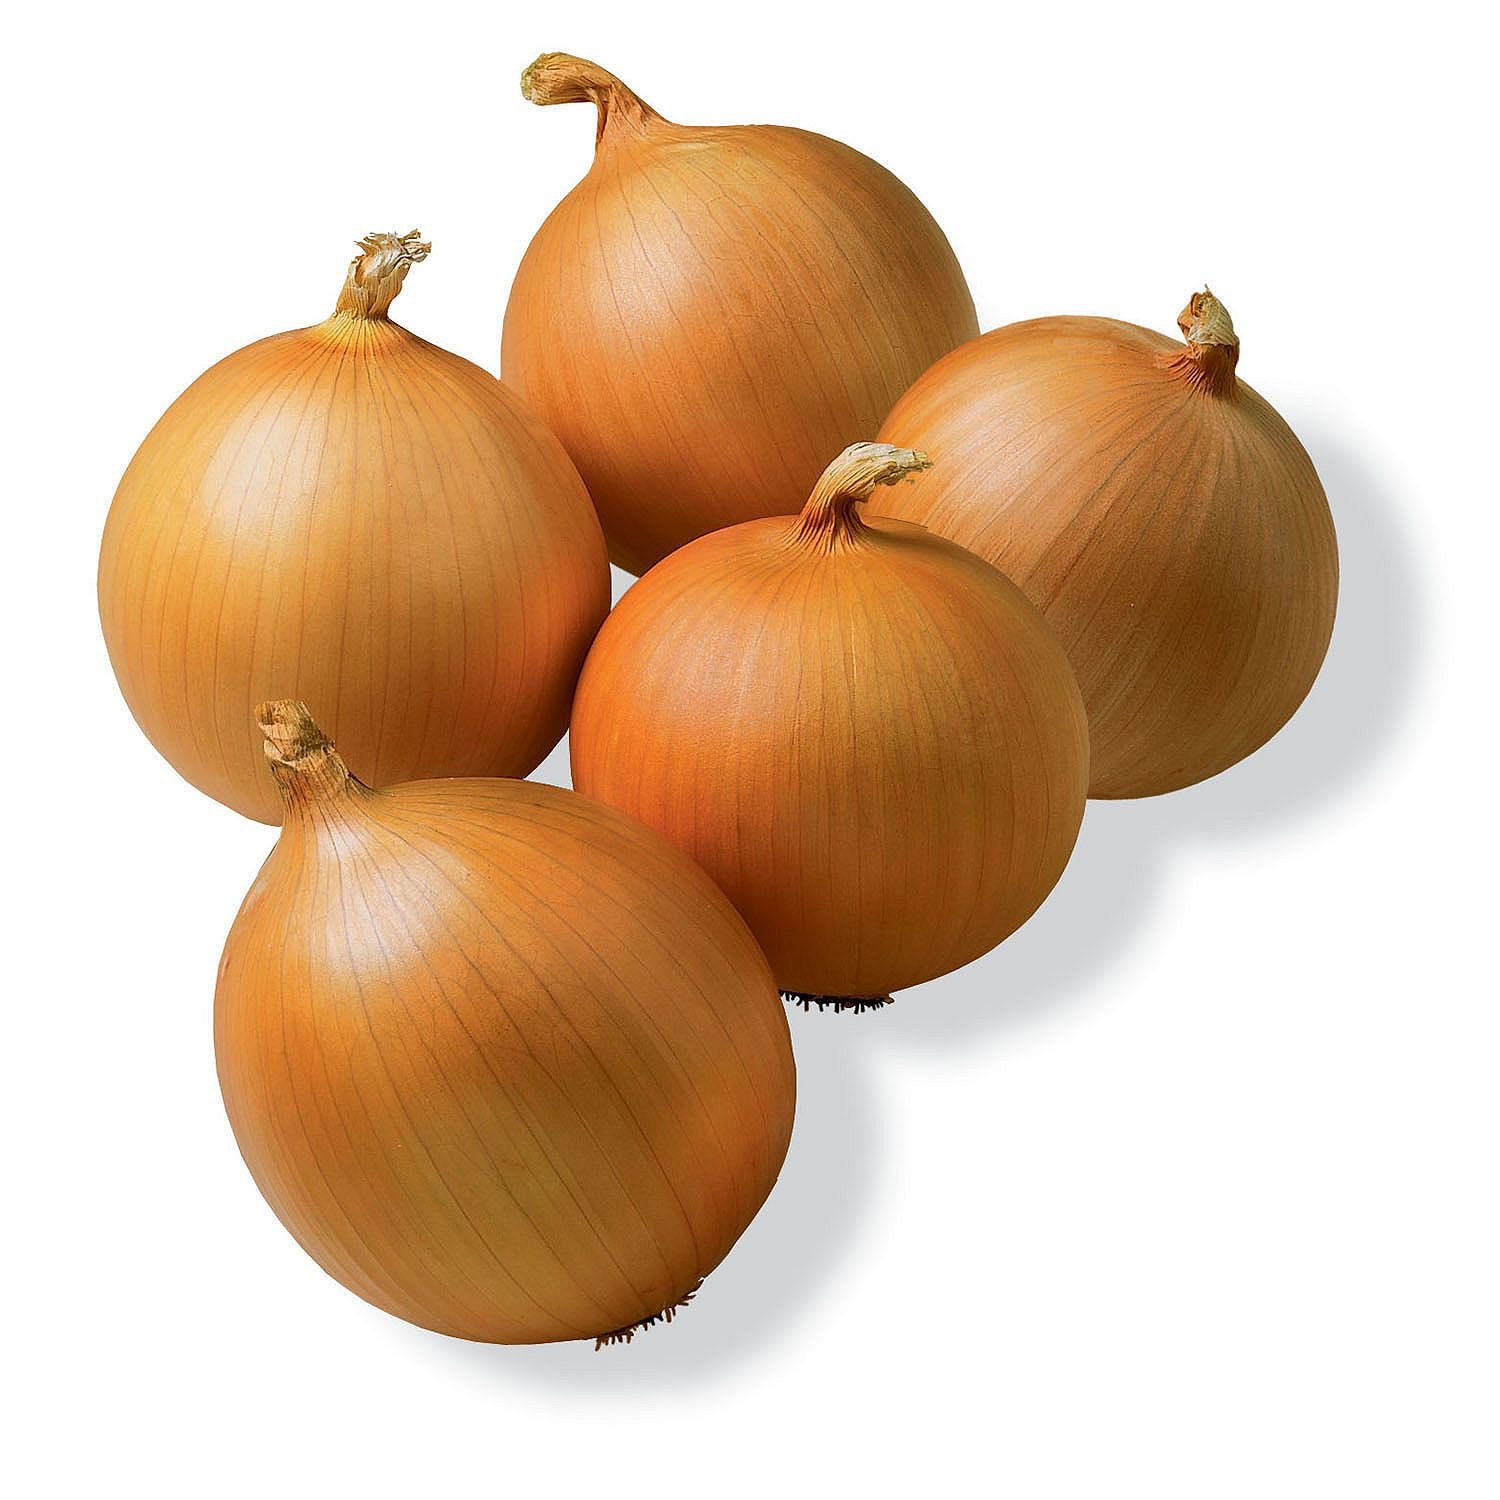 General 1500x1500 onion white background food vegetables